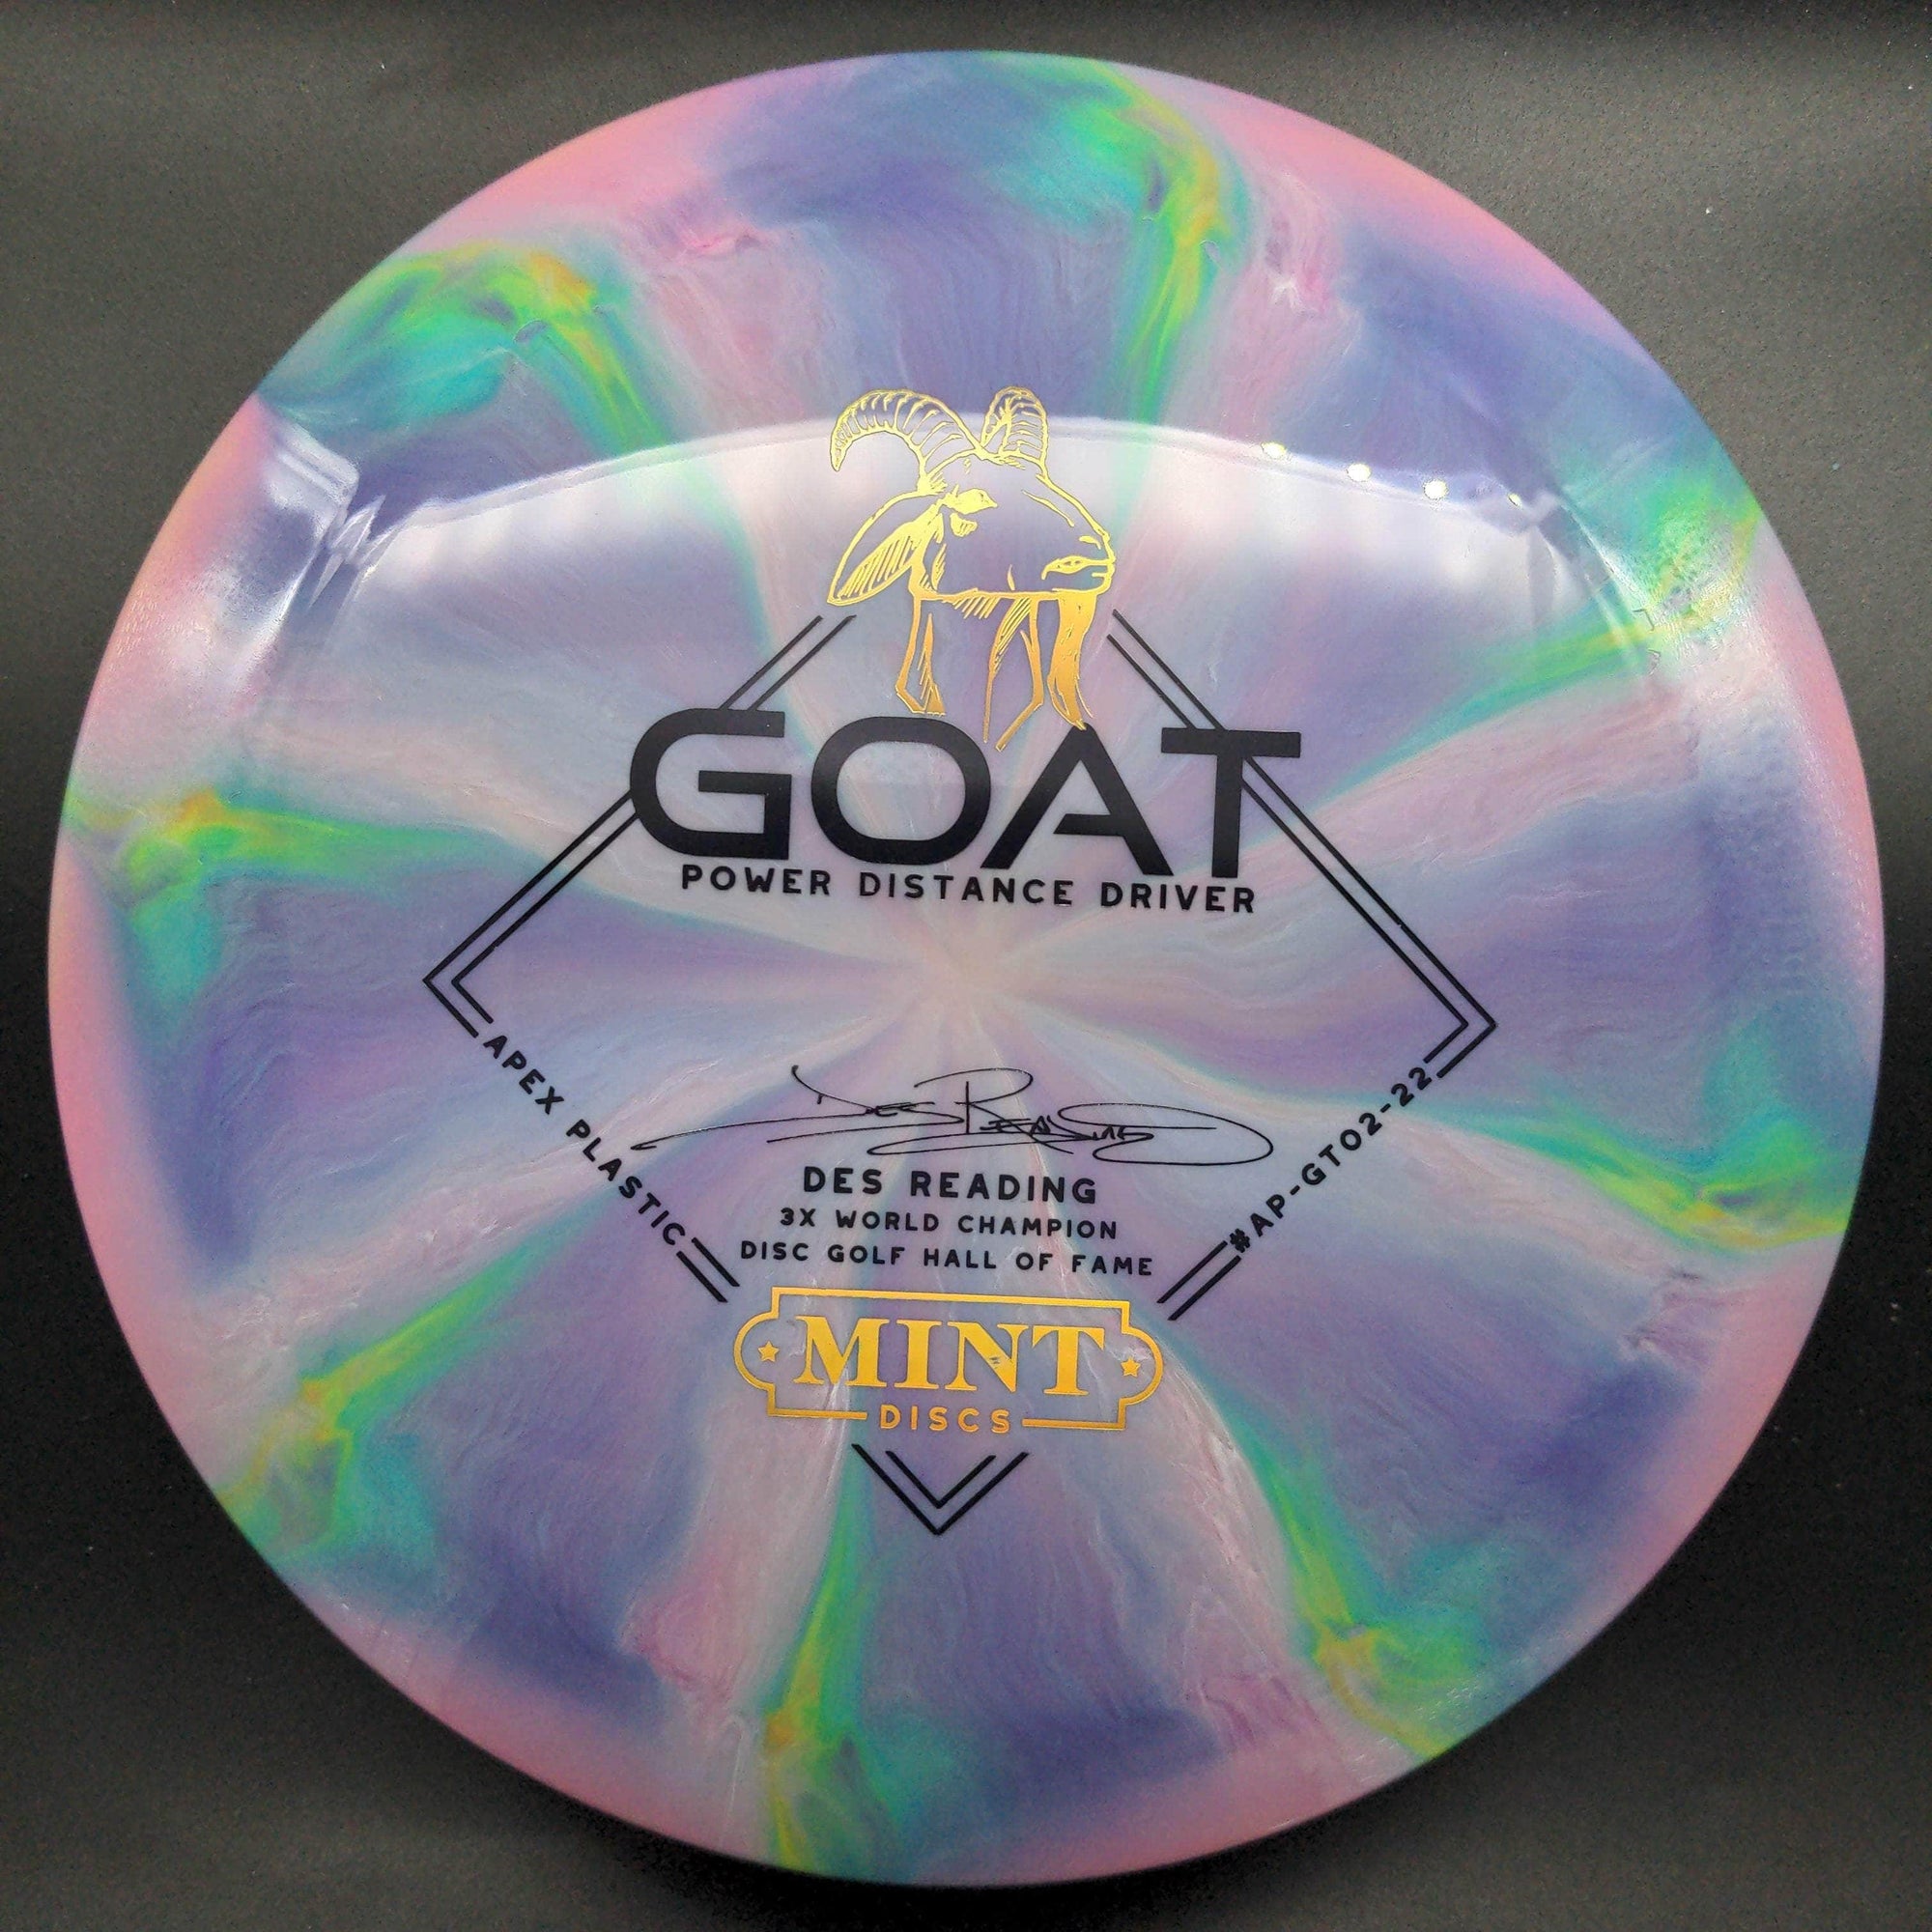 Mint Discs Distance Driver Yellow/Green Gold Stamp 174g Goat - Swirly Apex Plastic - Des Reading